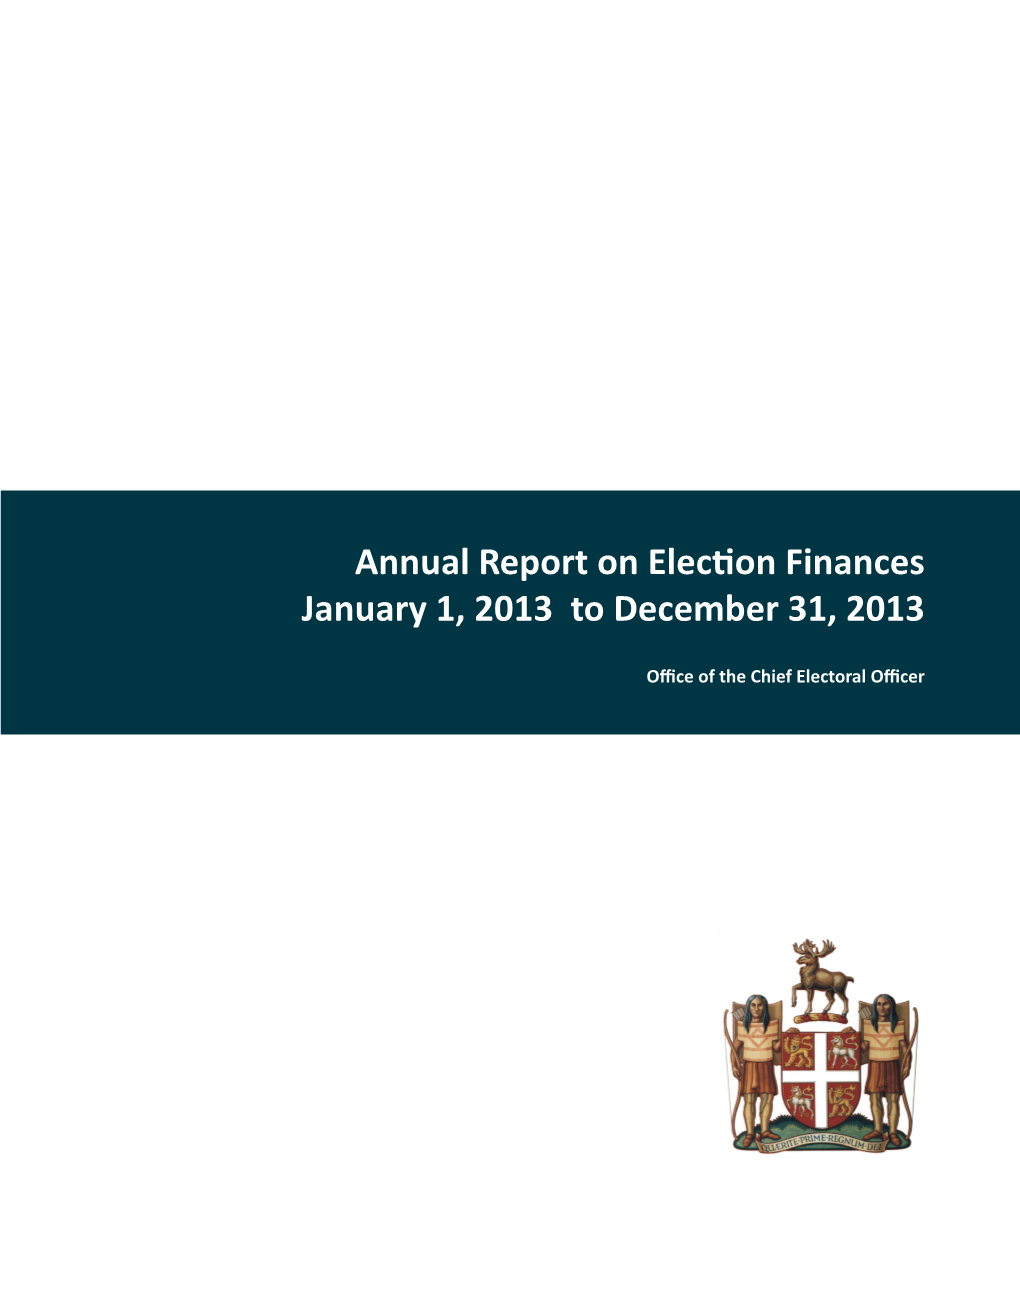 Annual Report on Election Finances January 1, 2013 to December 31, 2013